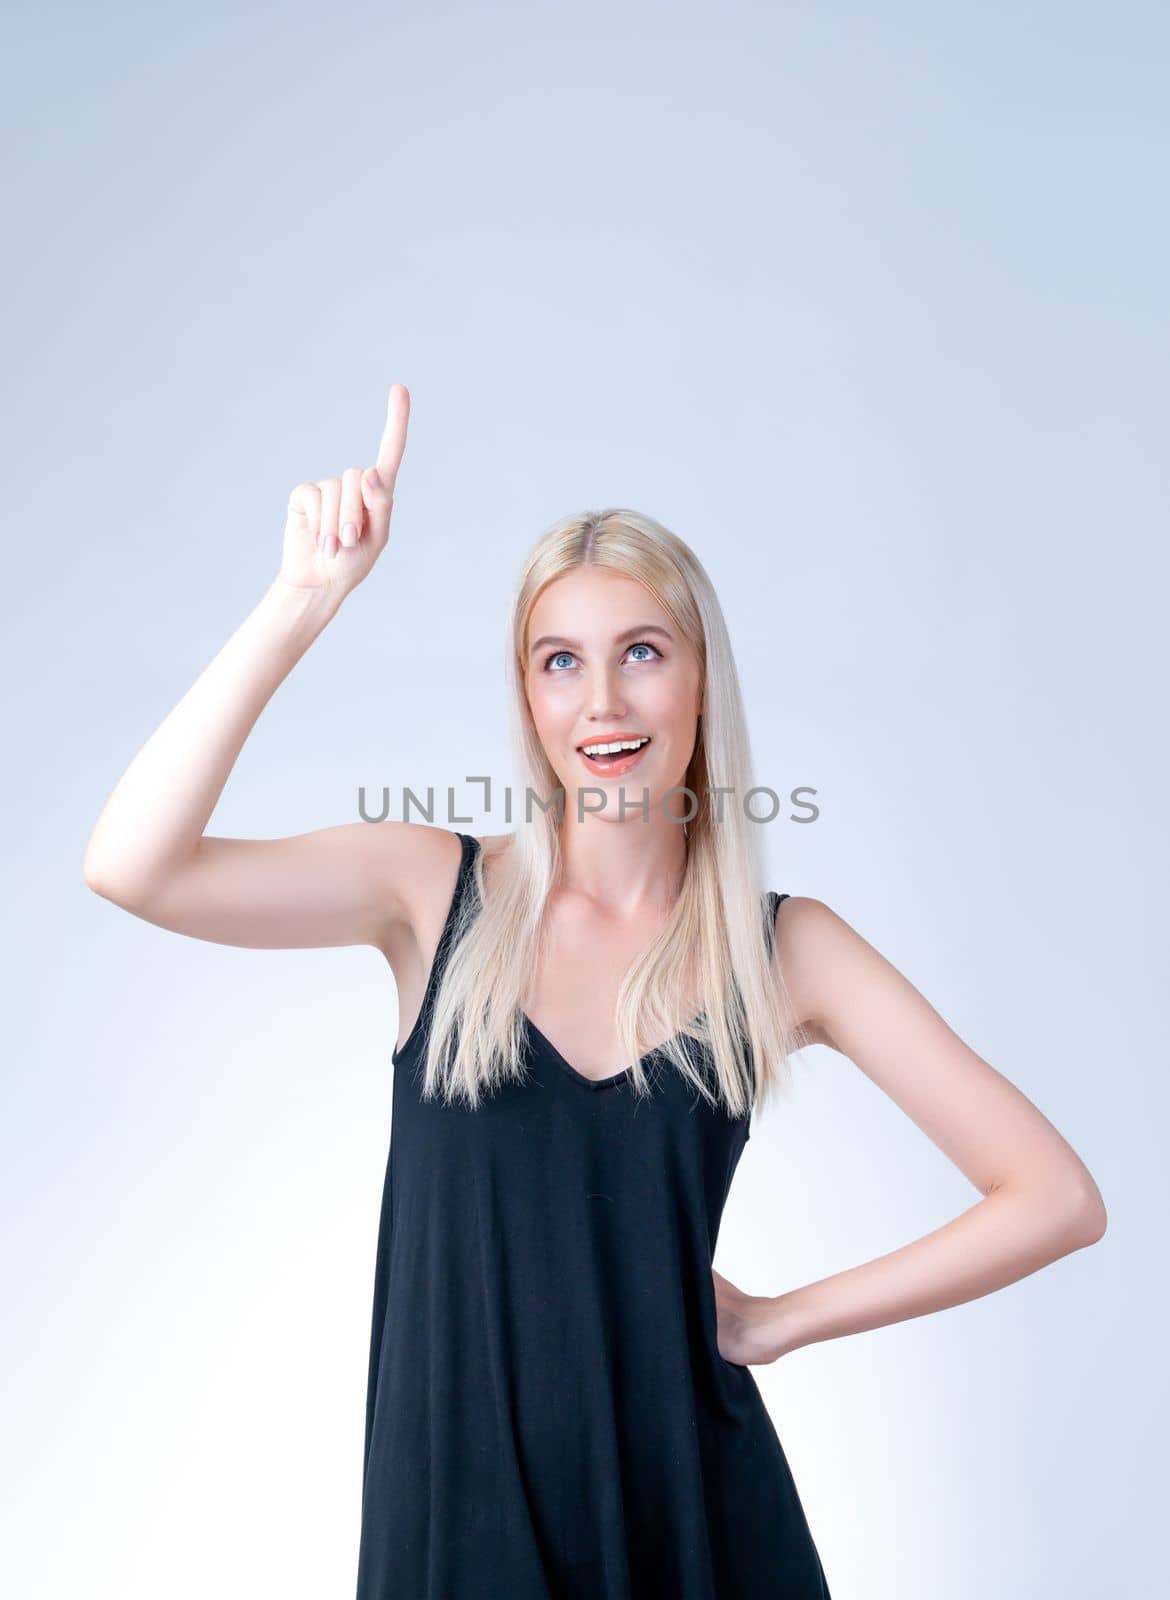 Personable beautiful woman with perfect makeup clean skin pointing finger up in copyspace isolated background. Promotion indicated by hand gesture to show skincare product advertising.